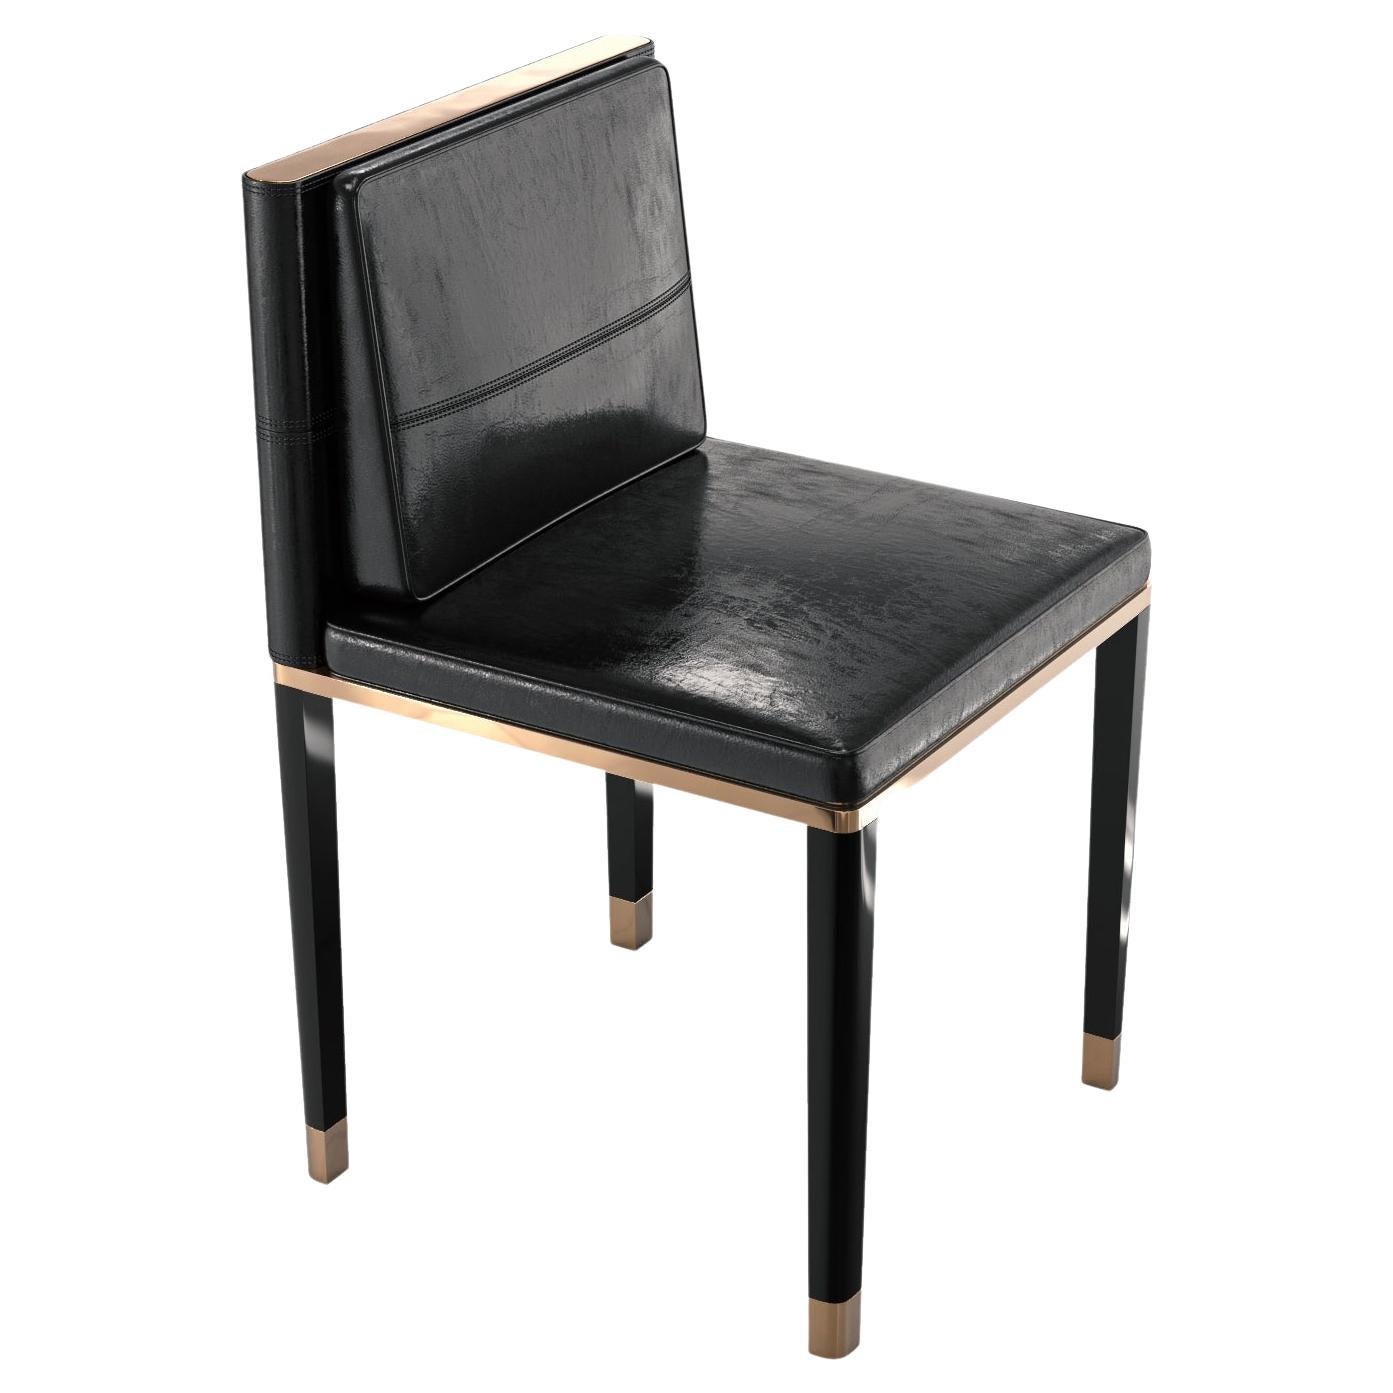 "Sabbia" Chair with Bronze and Tailor Made Leather, Istanbul